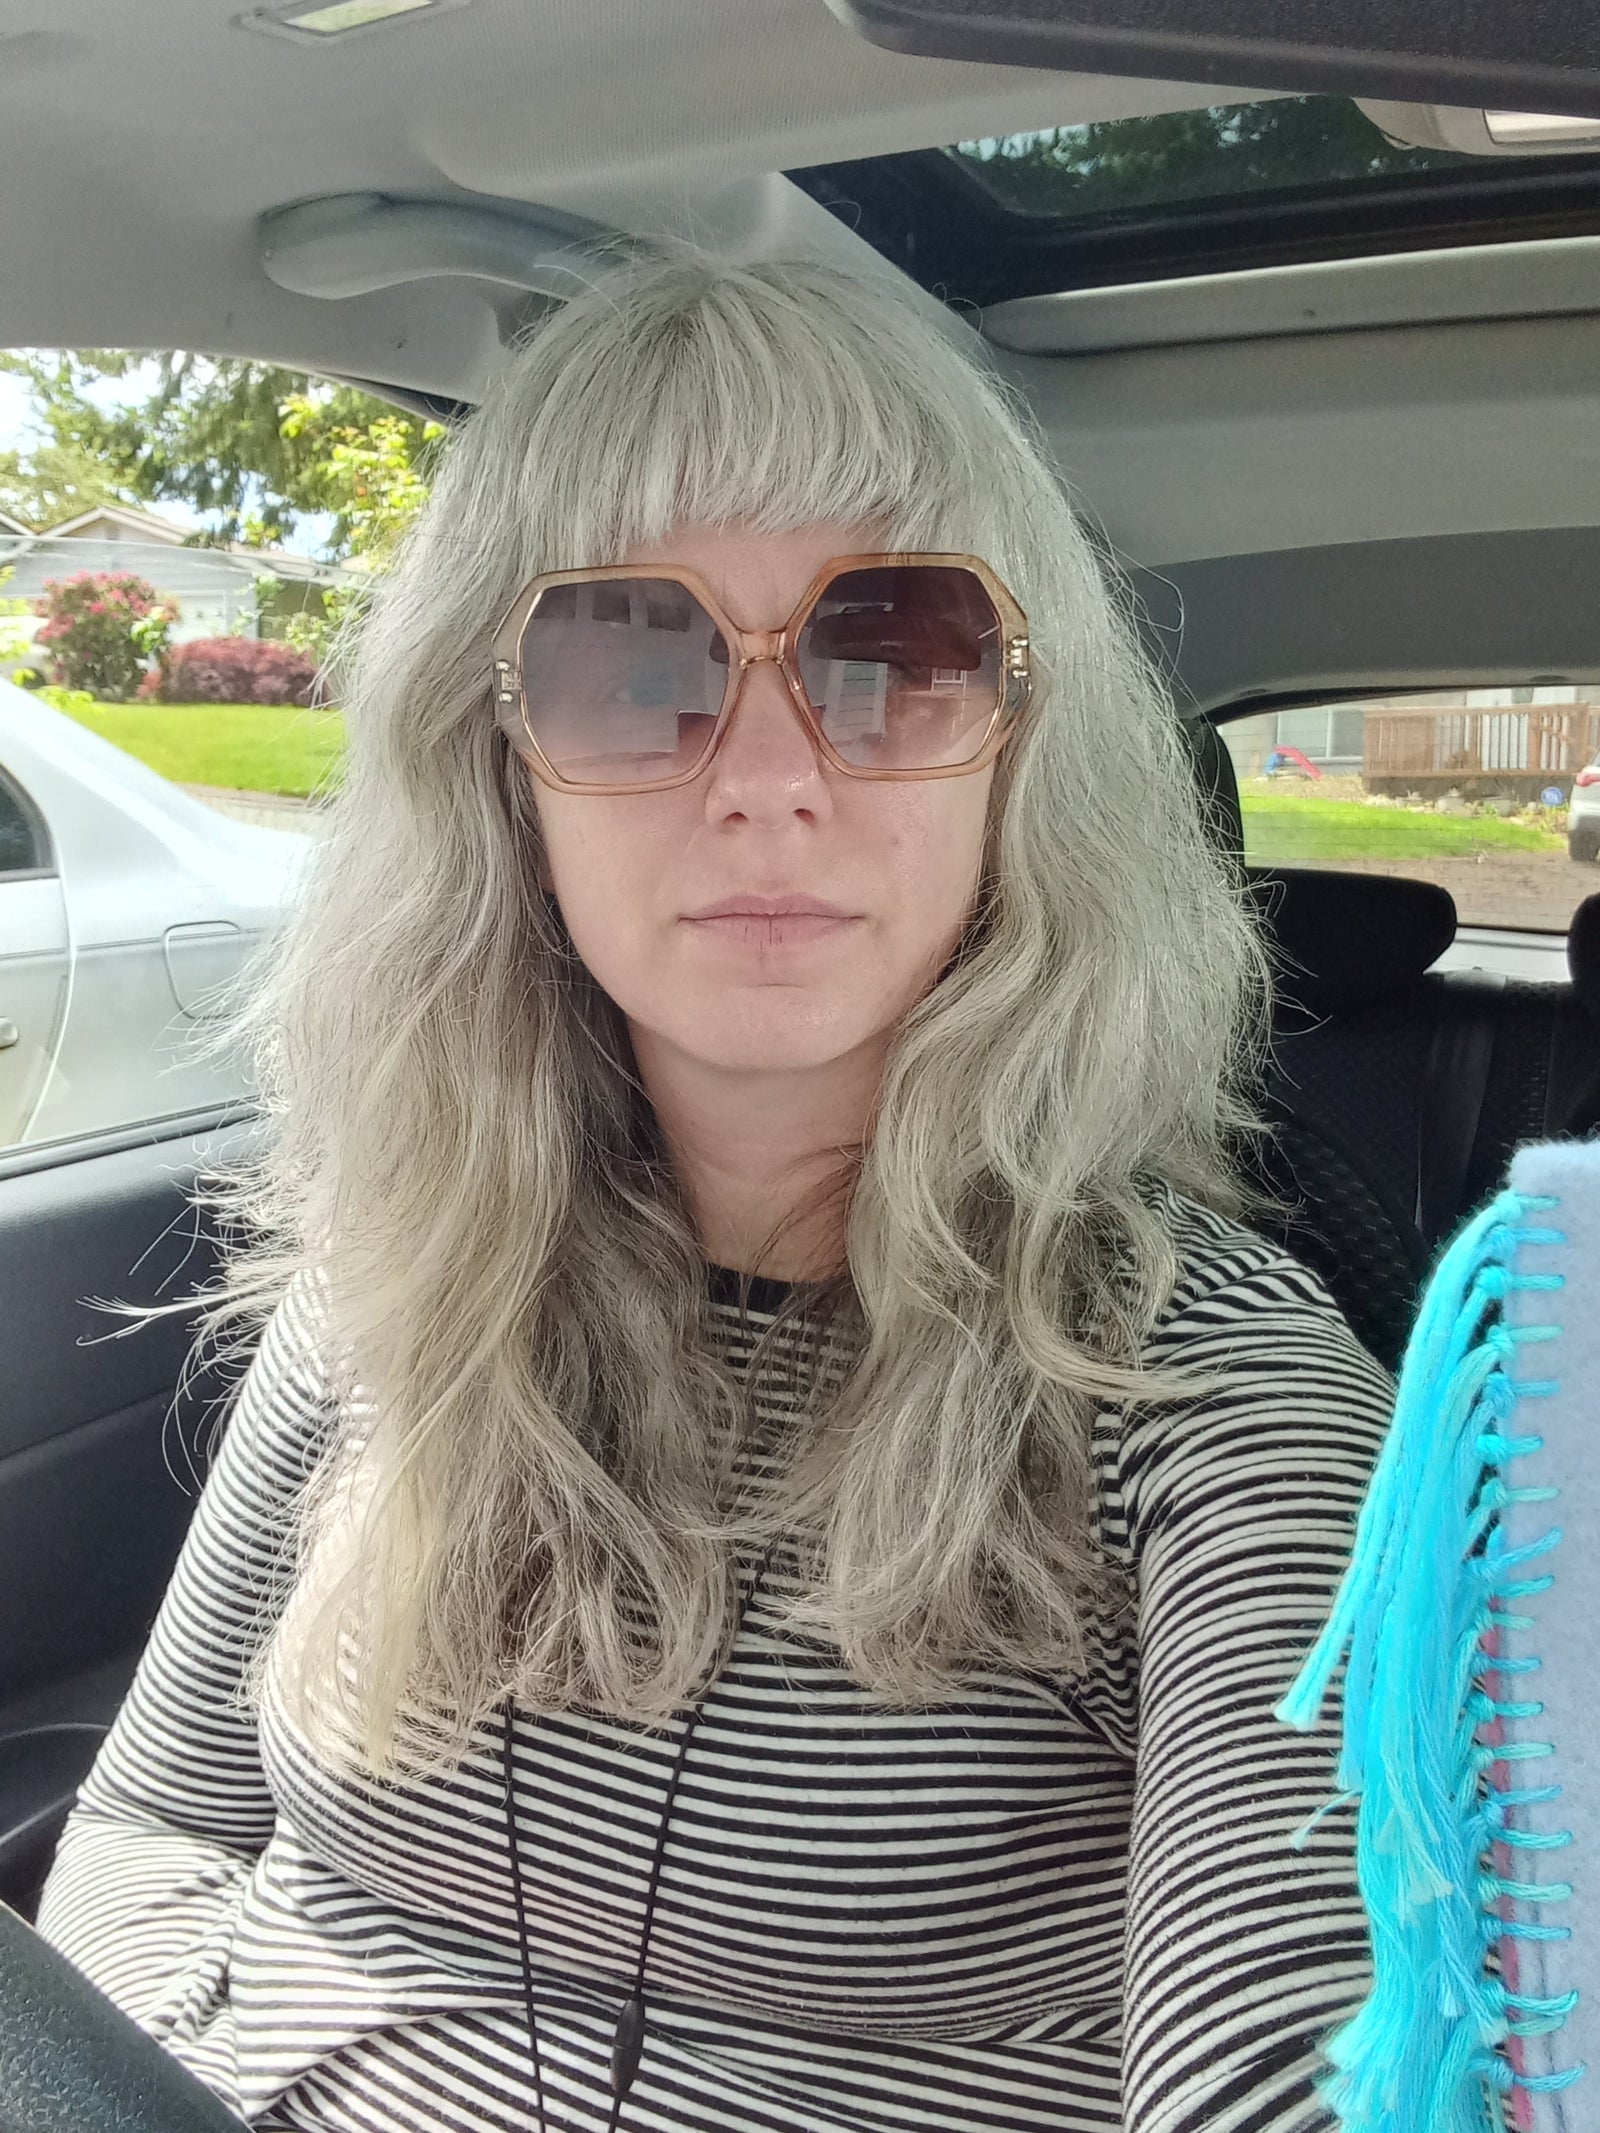 Person sitting in the car with long hair, and sunglasses on